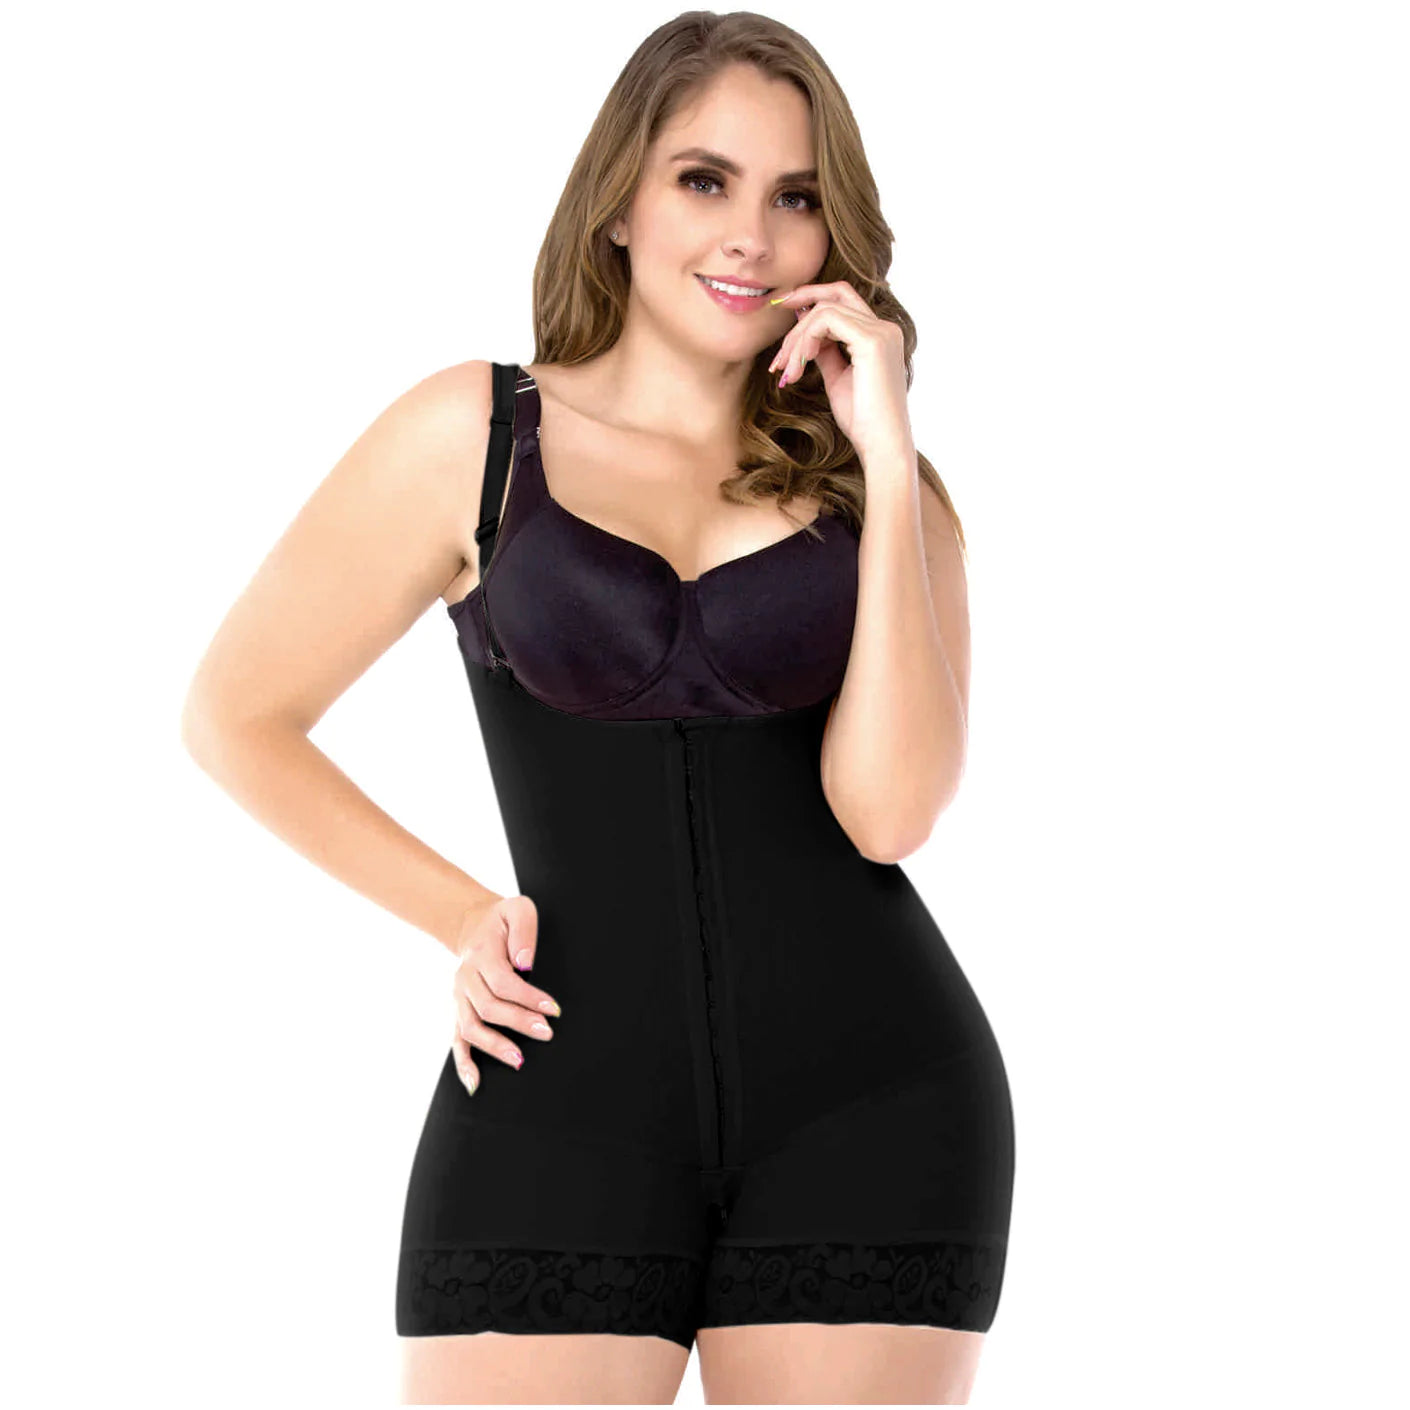 Miss Curvas fajas colombianas on Instagram: ✨ Introducing UpLady 6198,  where style meets comfort and curves are celebrated! 🌟 Our new collection  is crafted for the modern woman, designed to shape and